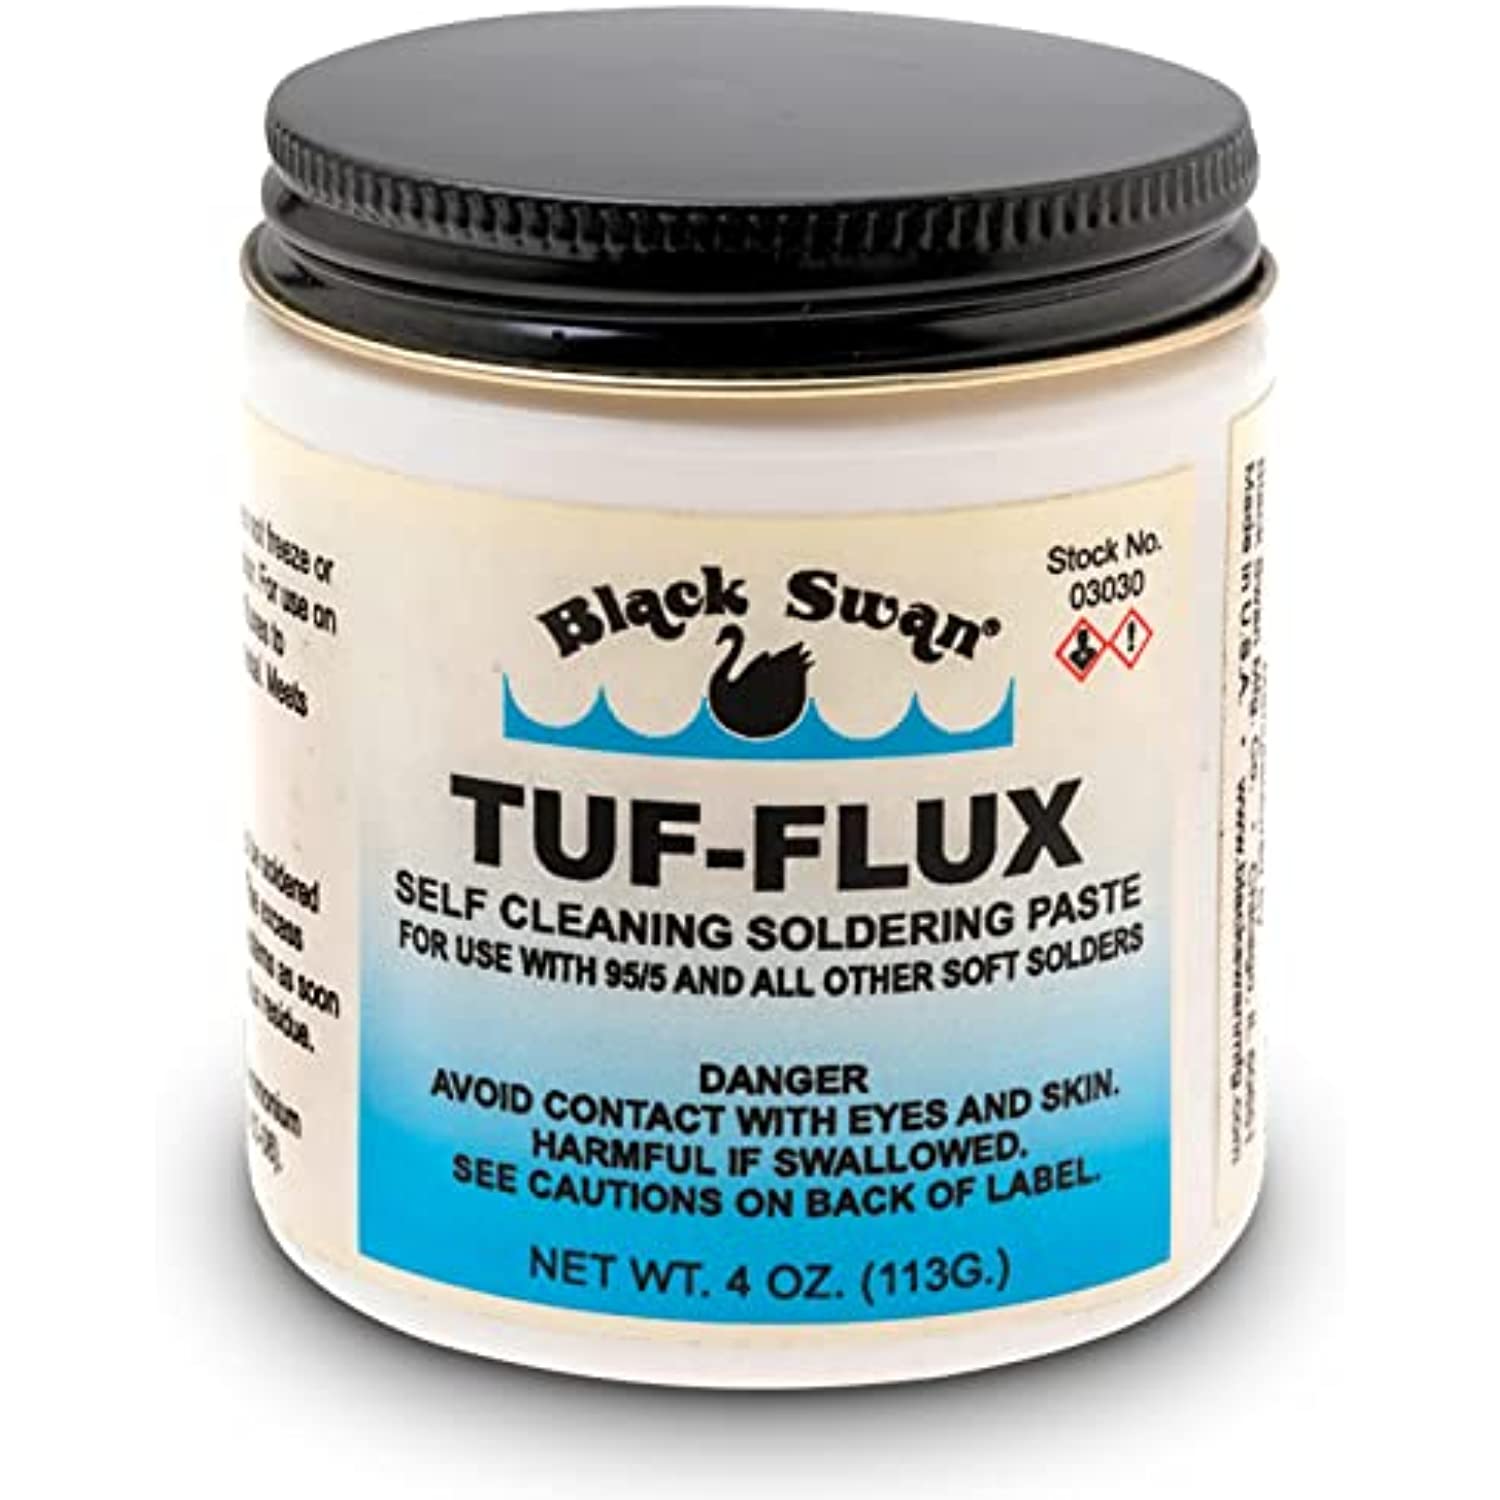 TUF-FLUX Soldering Paste - electrical flux paste - solder paste for electronics - Odorless and Non-Freezable - flux for silver soldering - Available with Premium Quality Centaurus AZ Gloves- 4 oz.